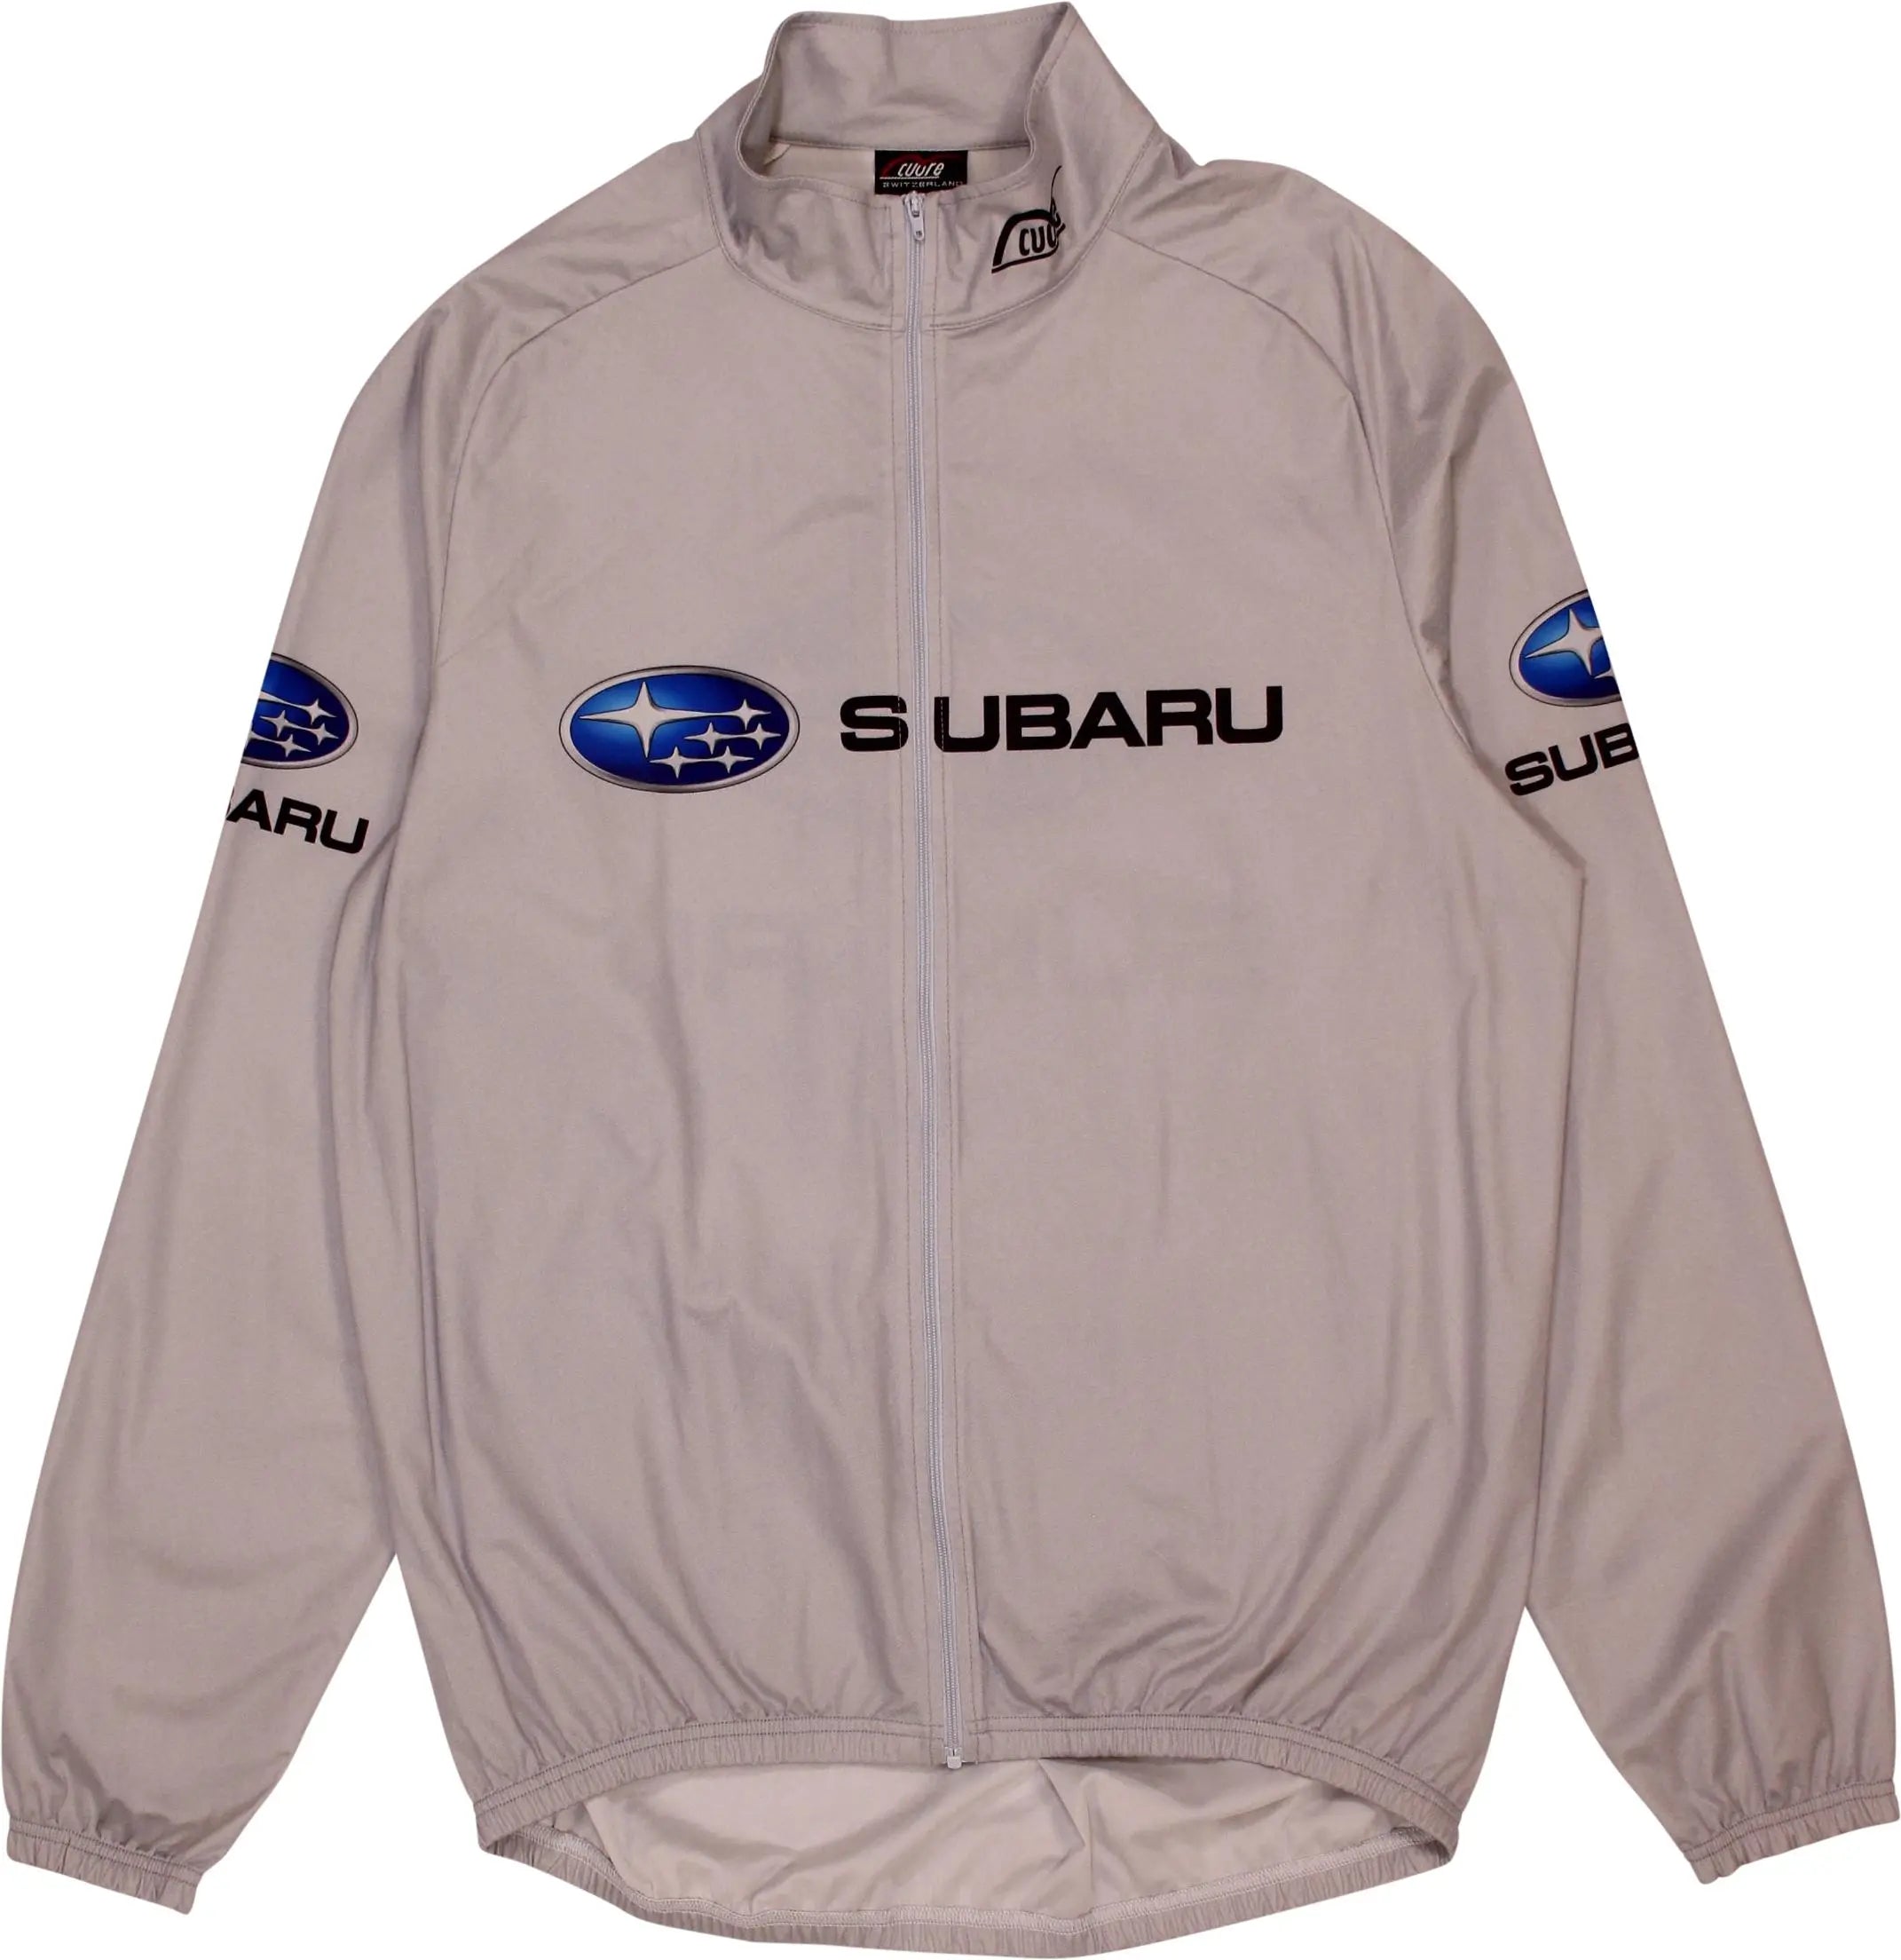 Cuore - Subaru Jacket- ThriftTale.com - Vintage and second handclothing